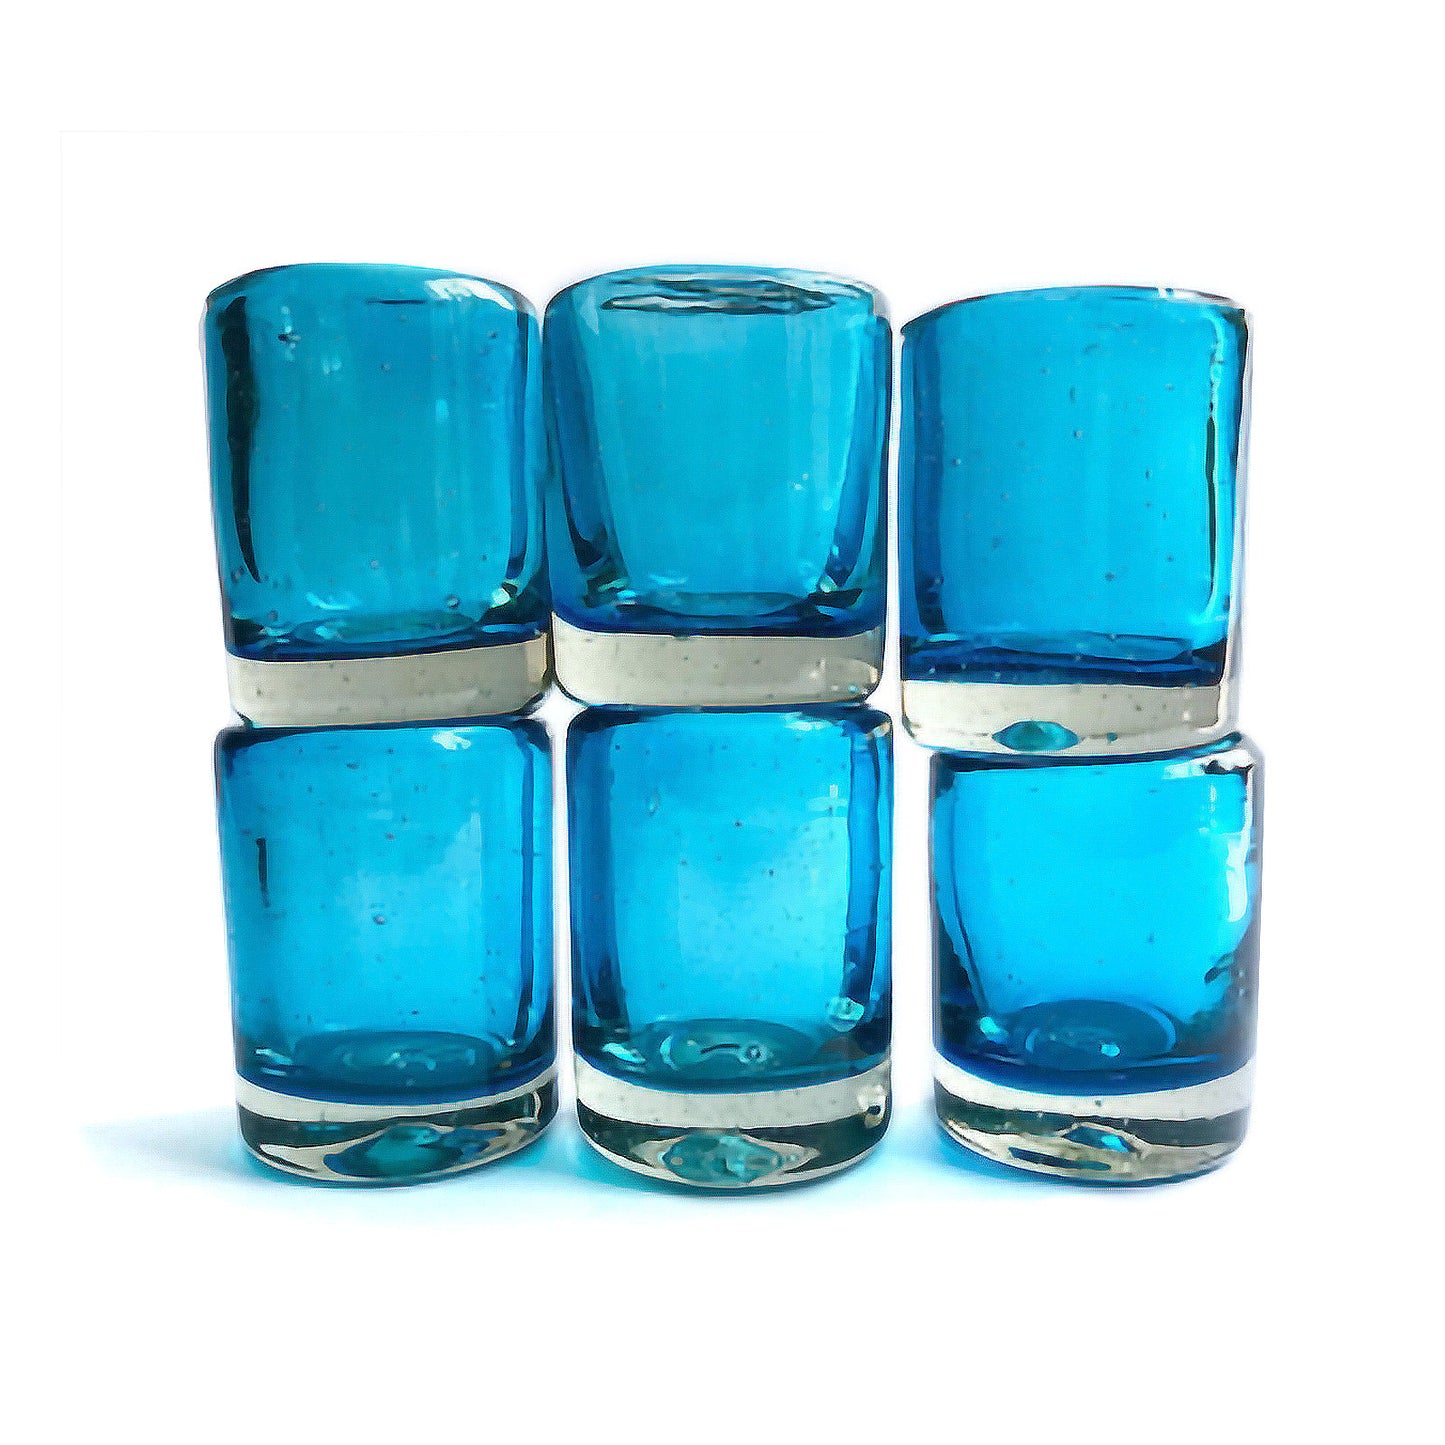 Blown Glass Shot Glass in Turquoise